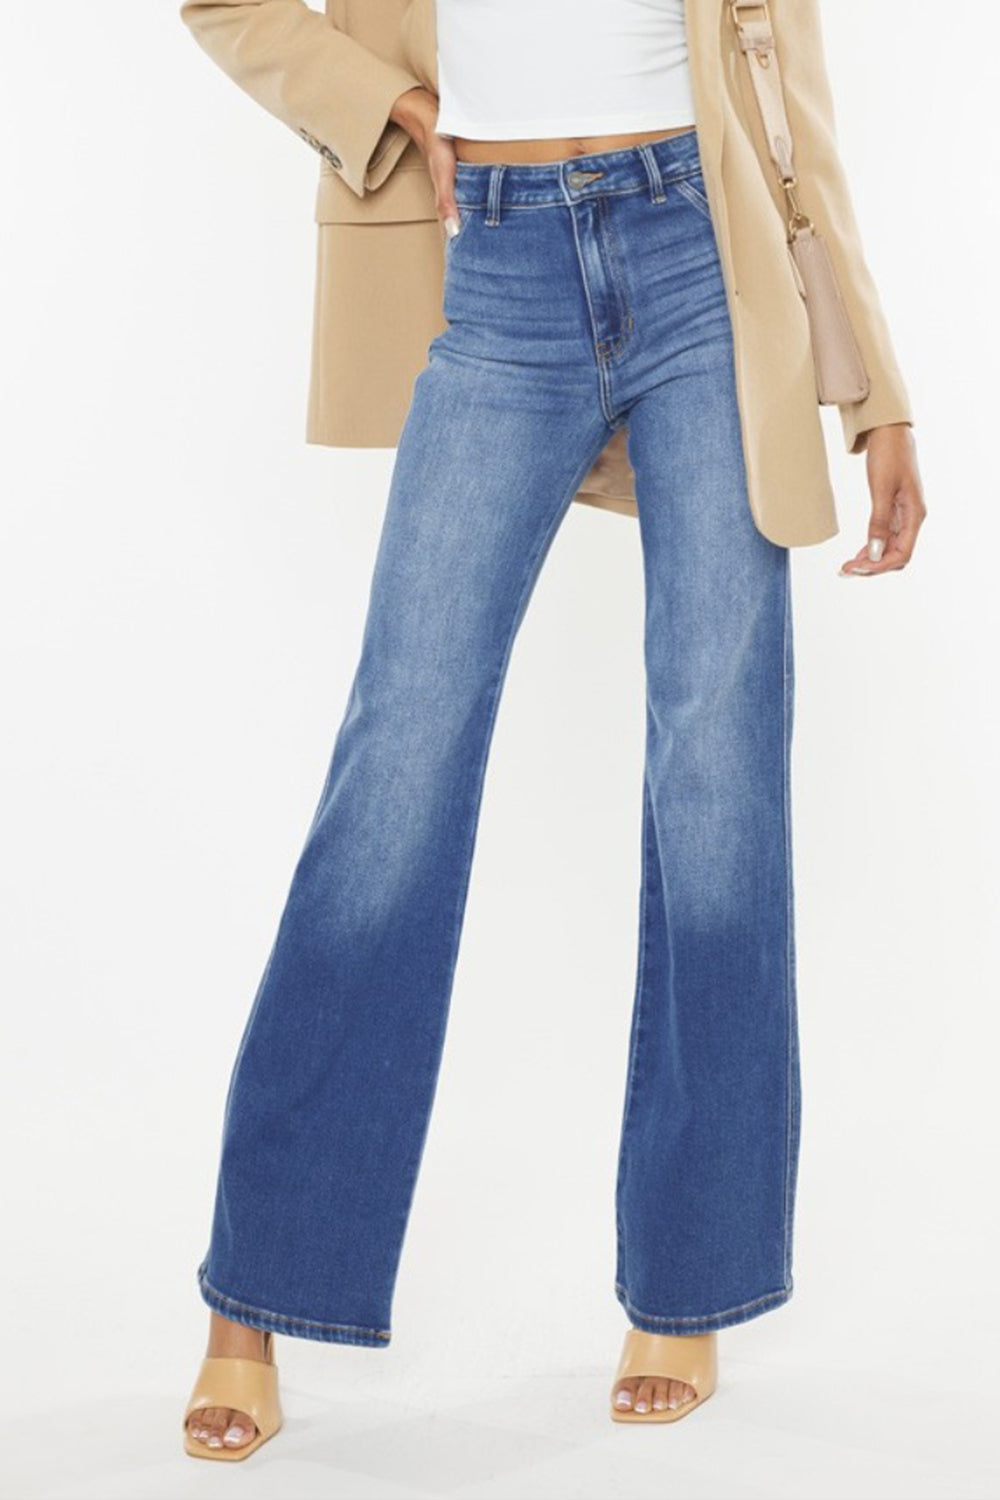 KanCan Flare Jeans - Ultra High Rise - Inspired Eye Boutique